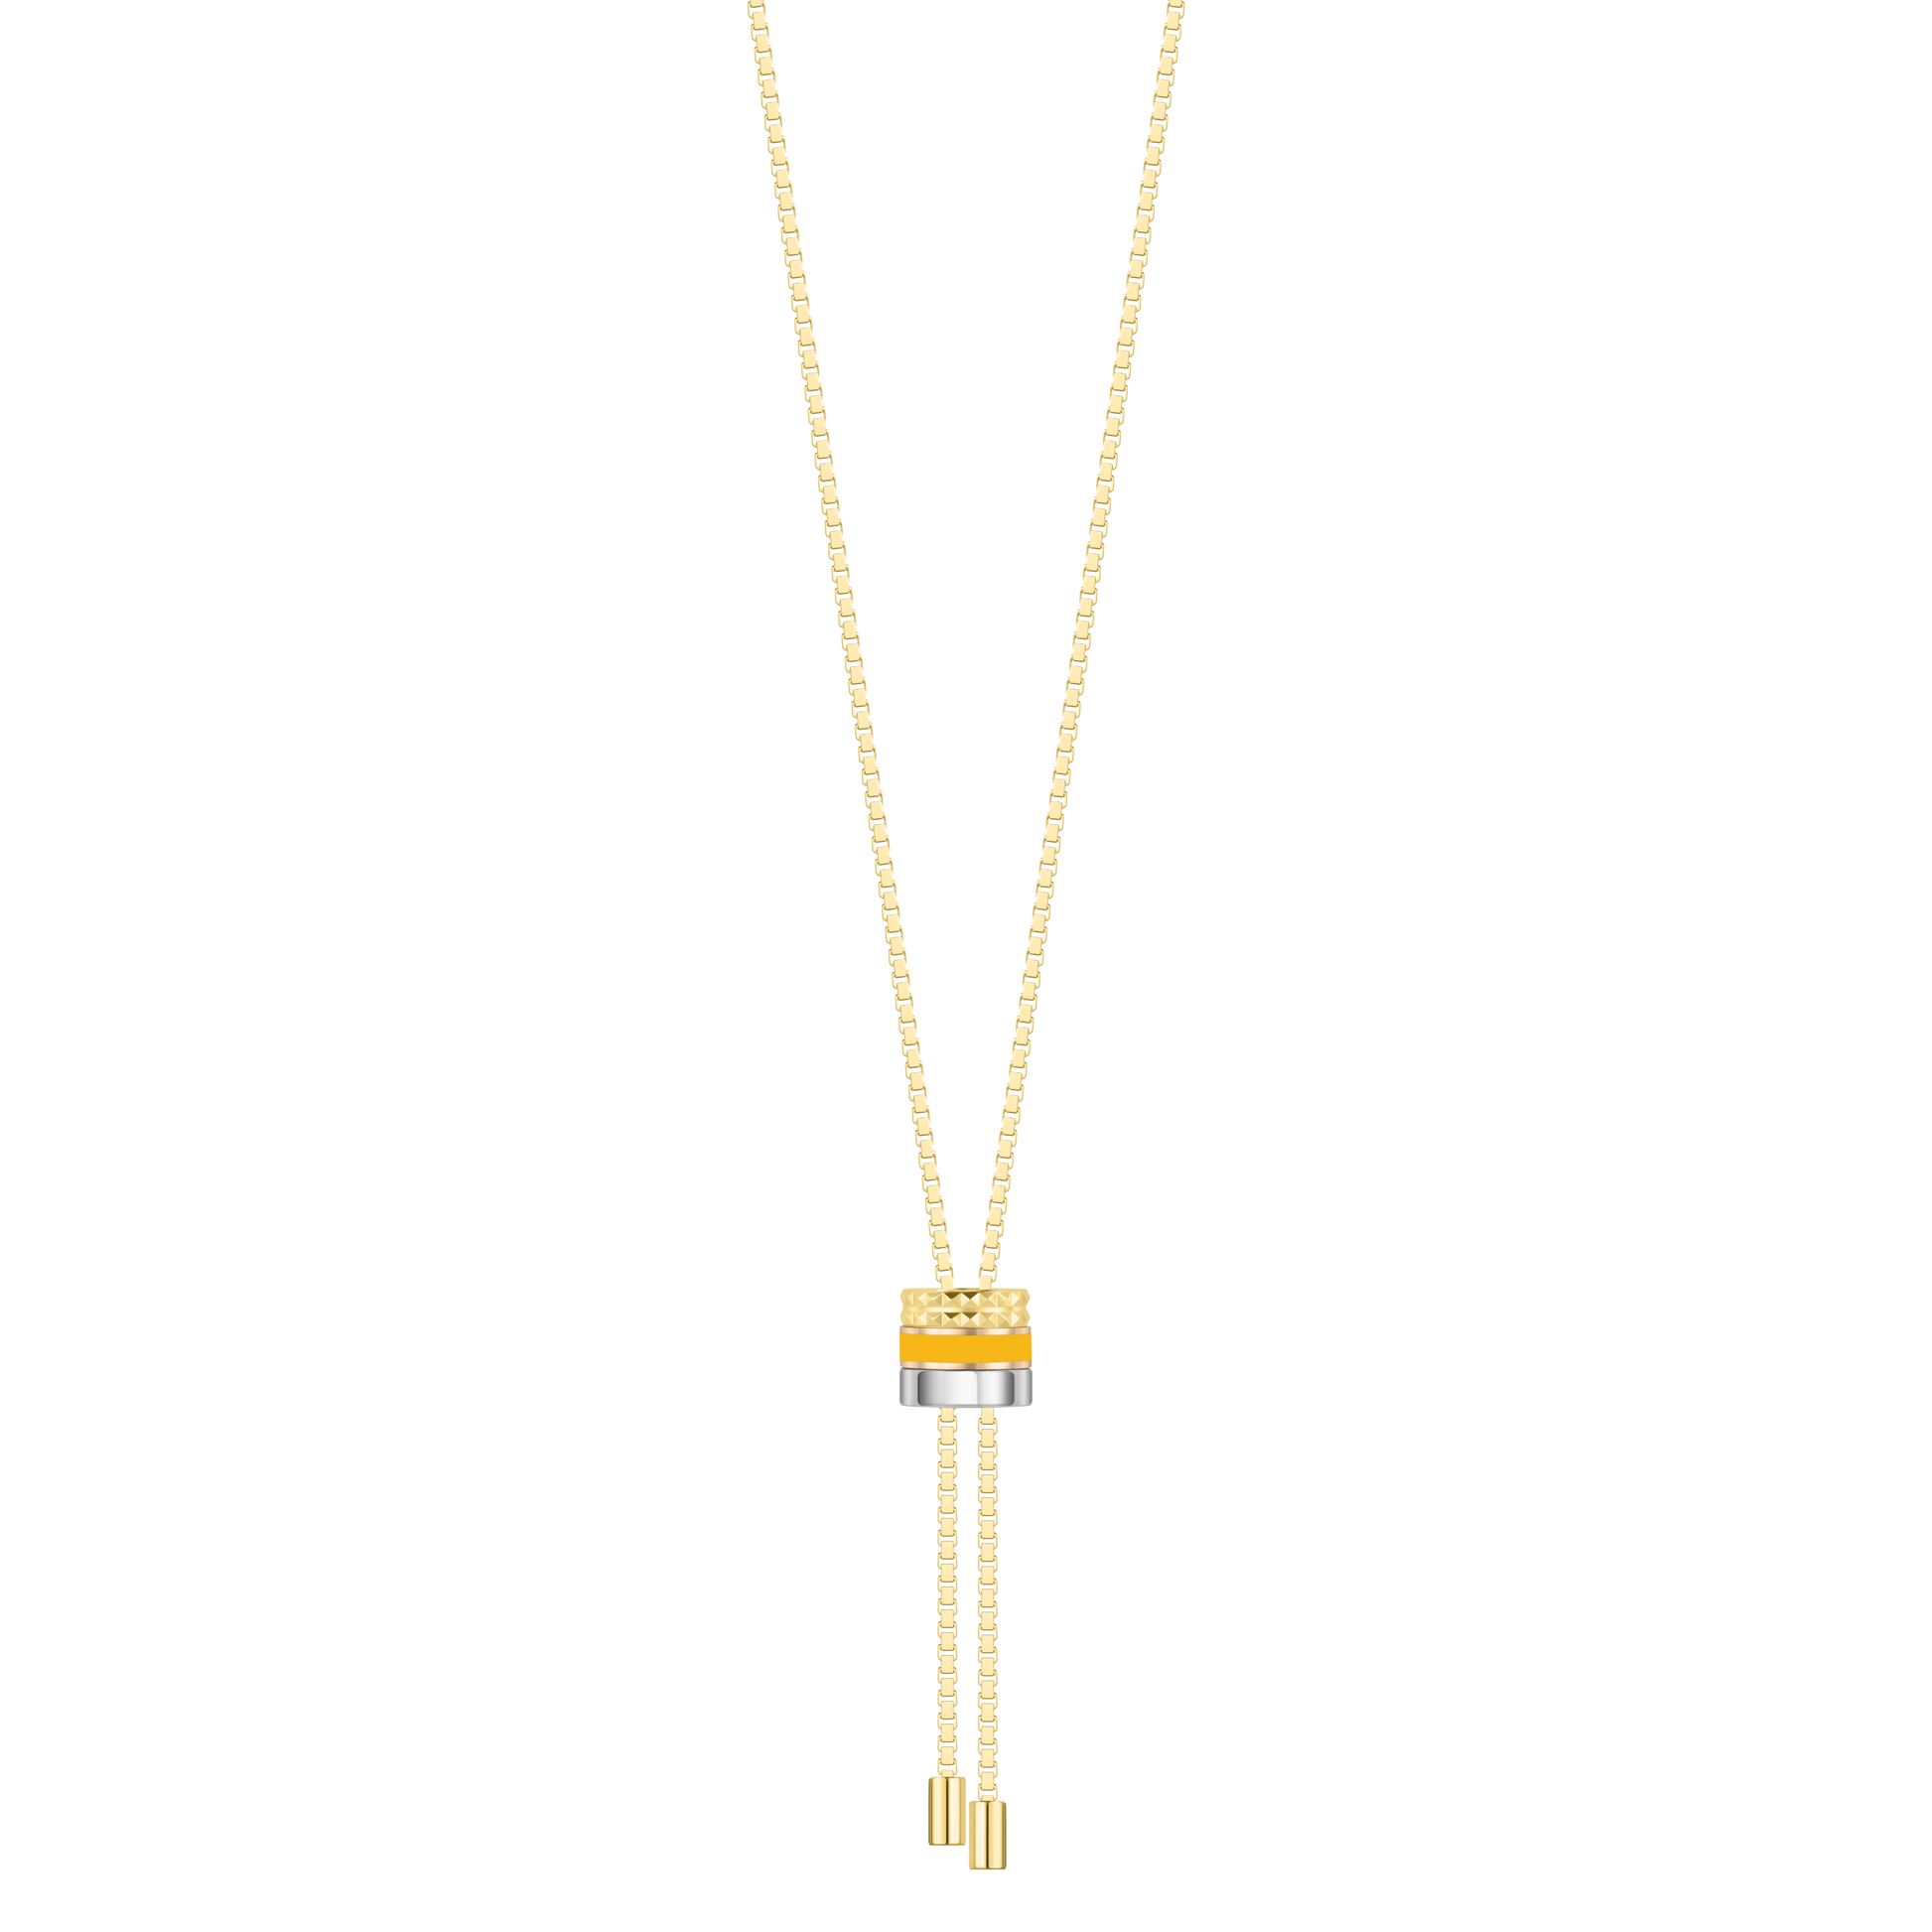 WEWA BOLO TIE TUBE SPECTRA YELLOW CHIP NECKLACE